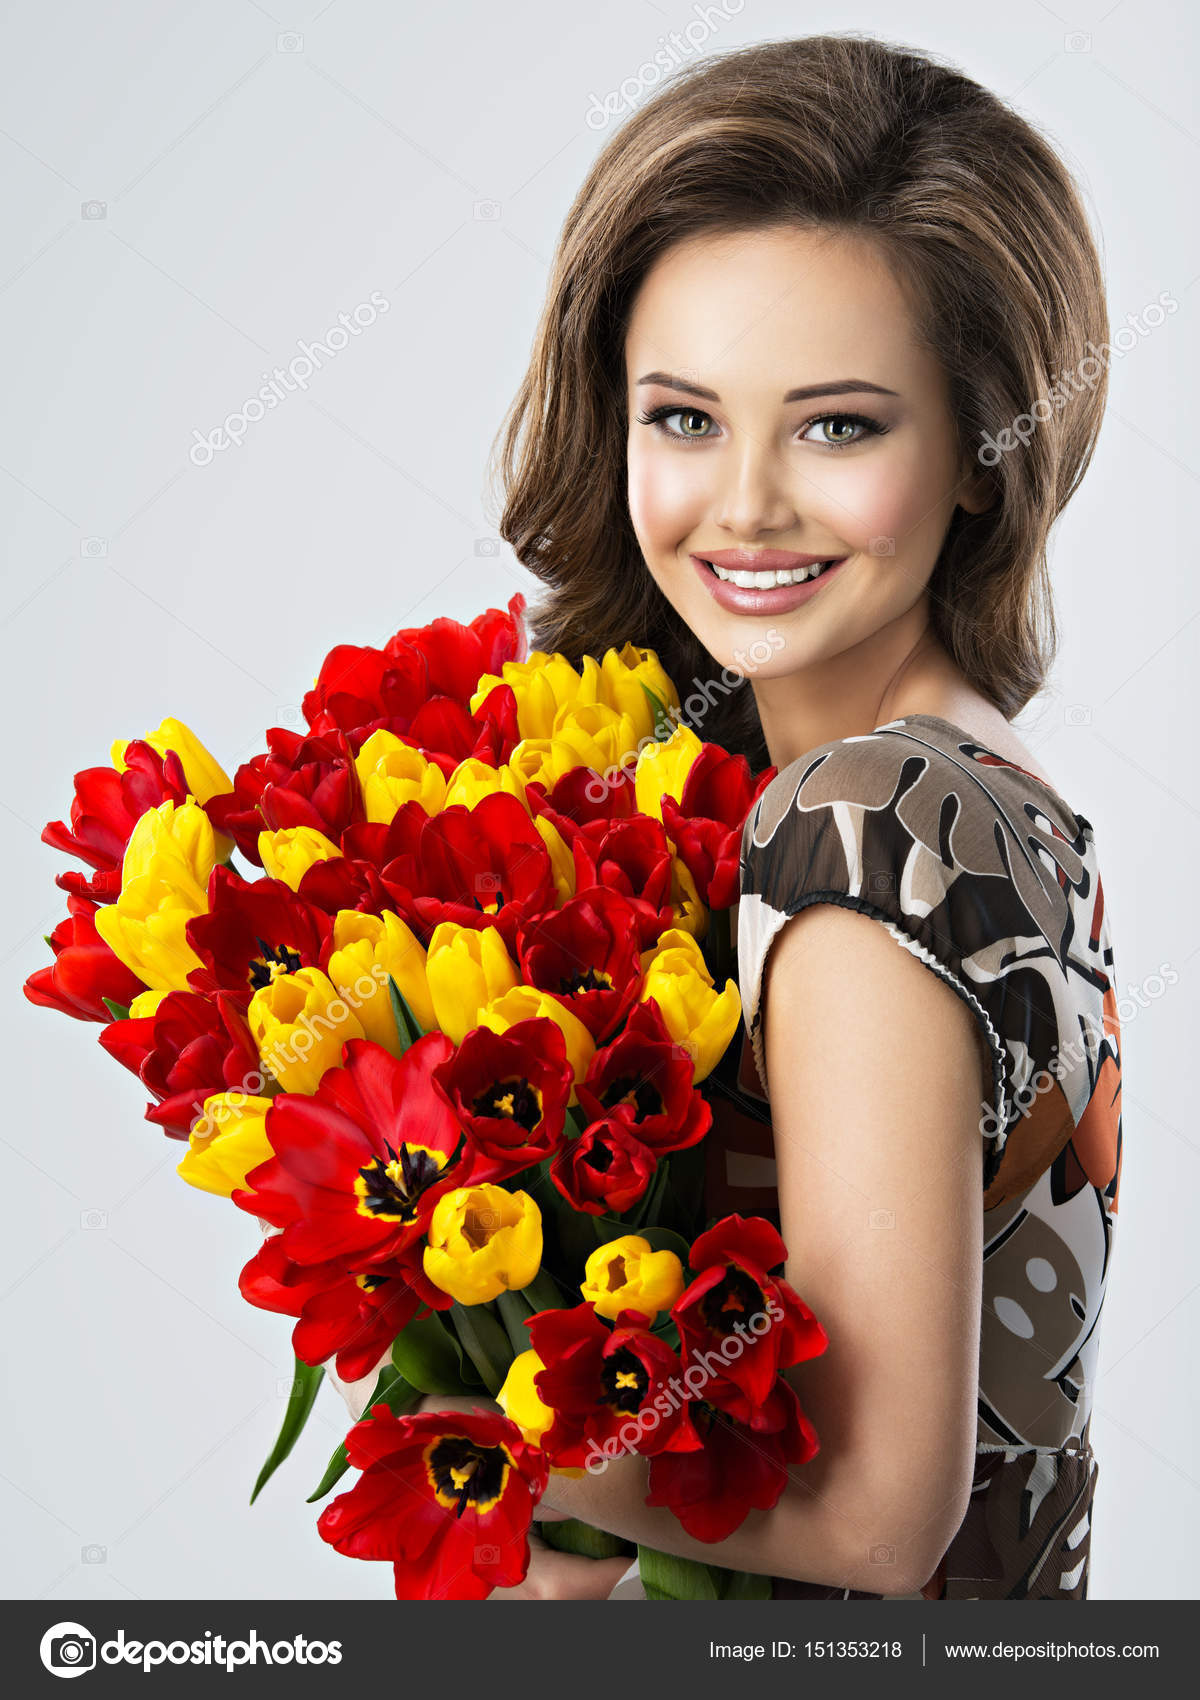 woman with flowers in hands — Stock Photo © valuavitaly #151353218